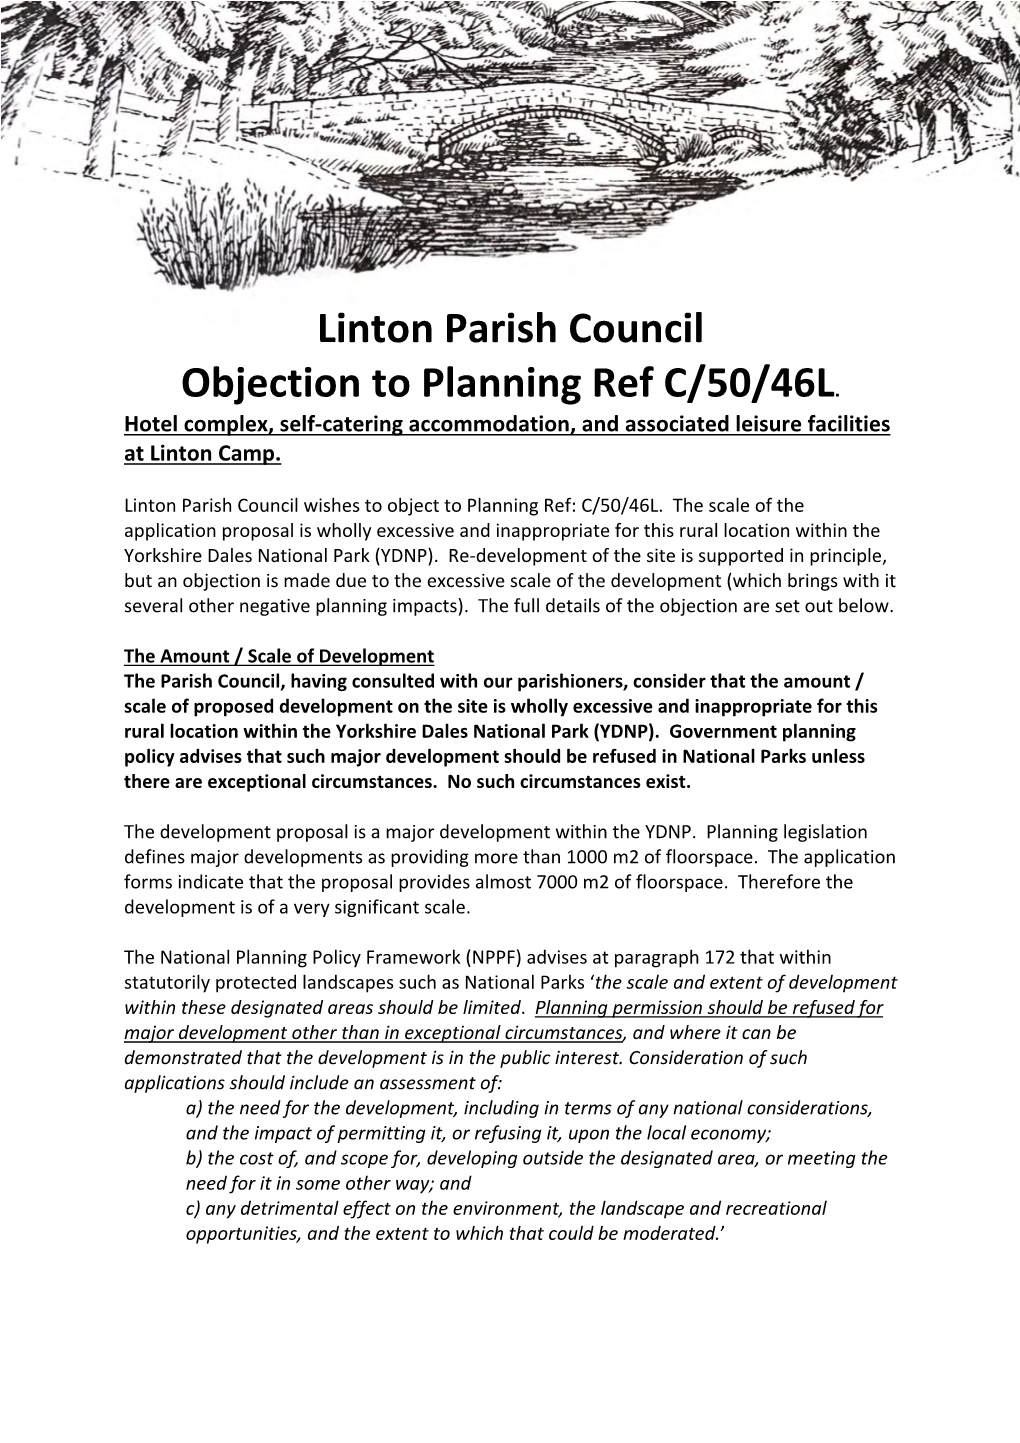 Linton Parish Council Objection to Planning Ref C/50/46L. Hotel Complex, Self‐Catering Accommodation, and Associated Leisure Facilities at Linton Camp